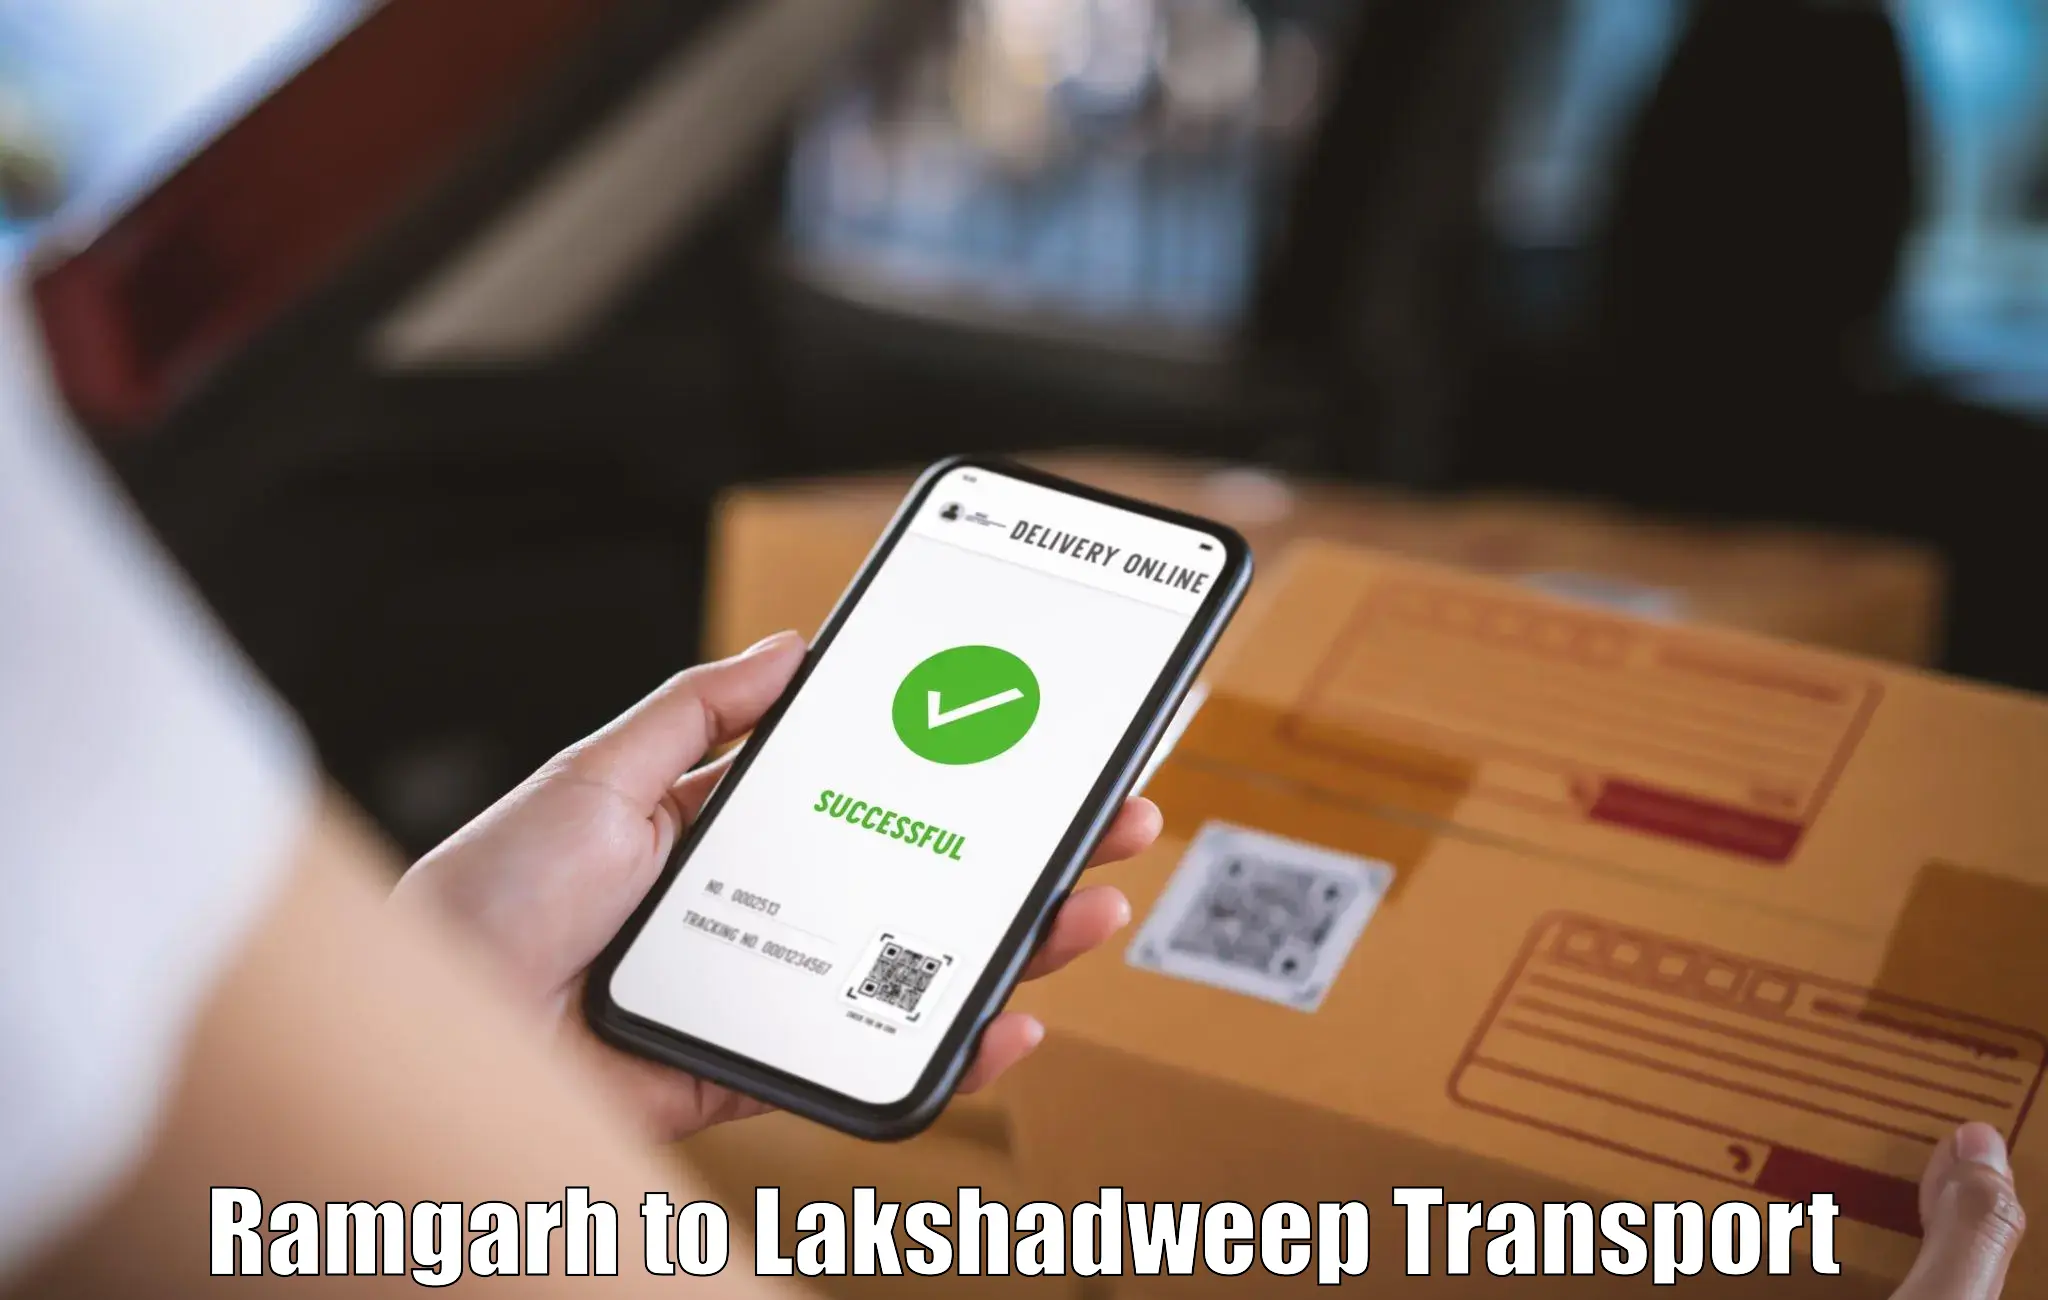 Online transport service Ramgarh to Lakshadweep